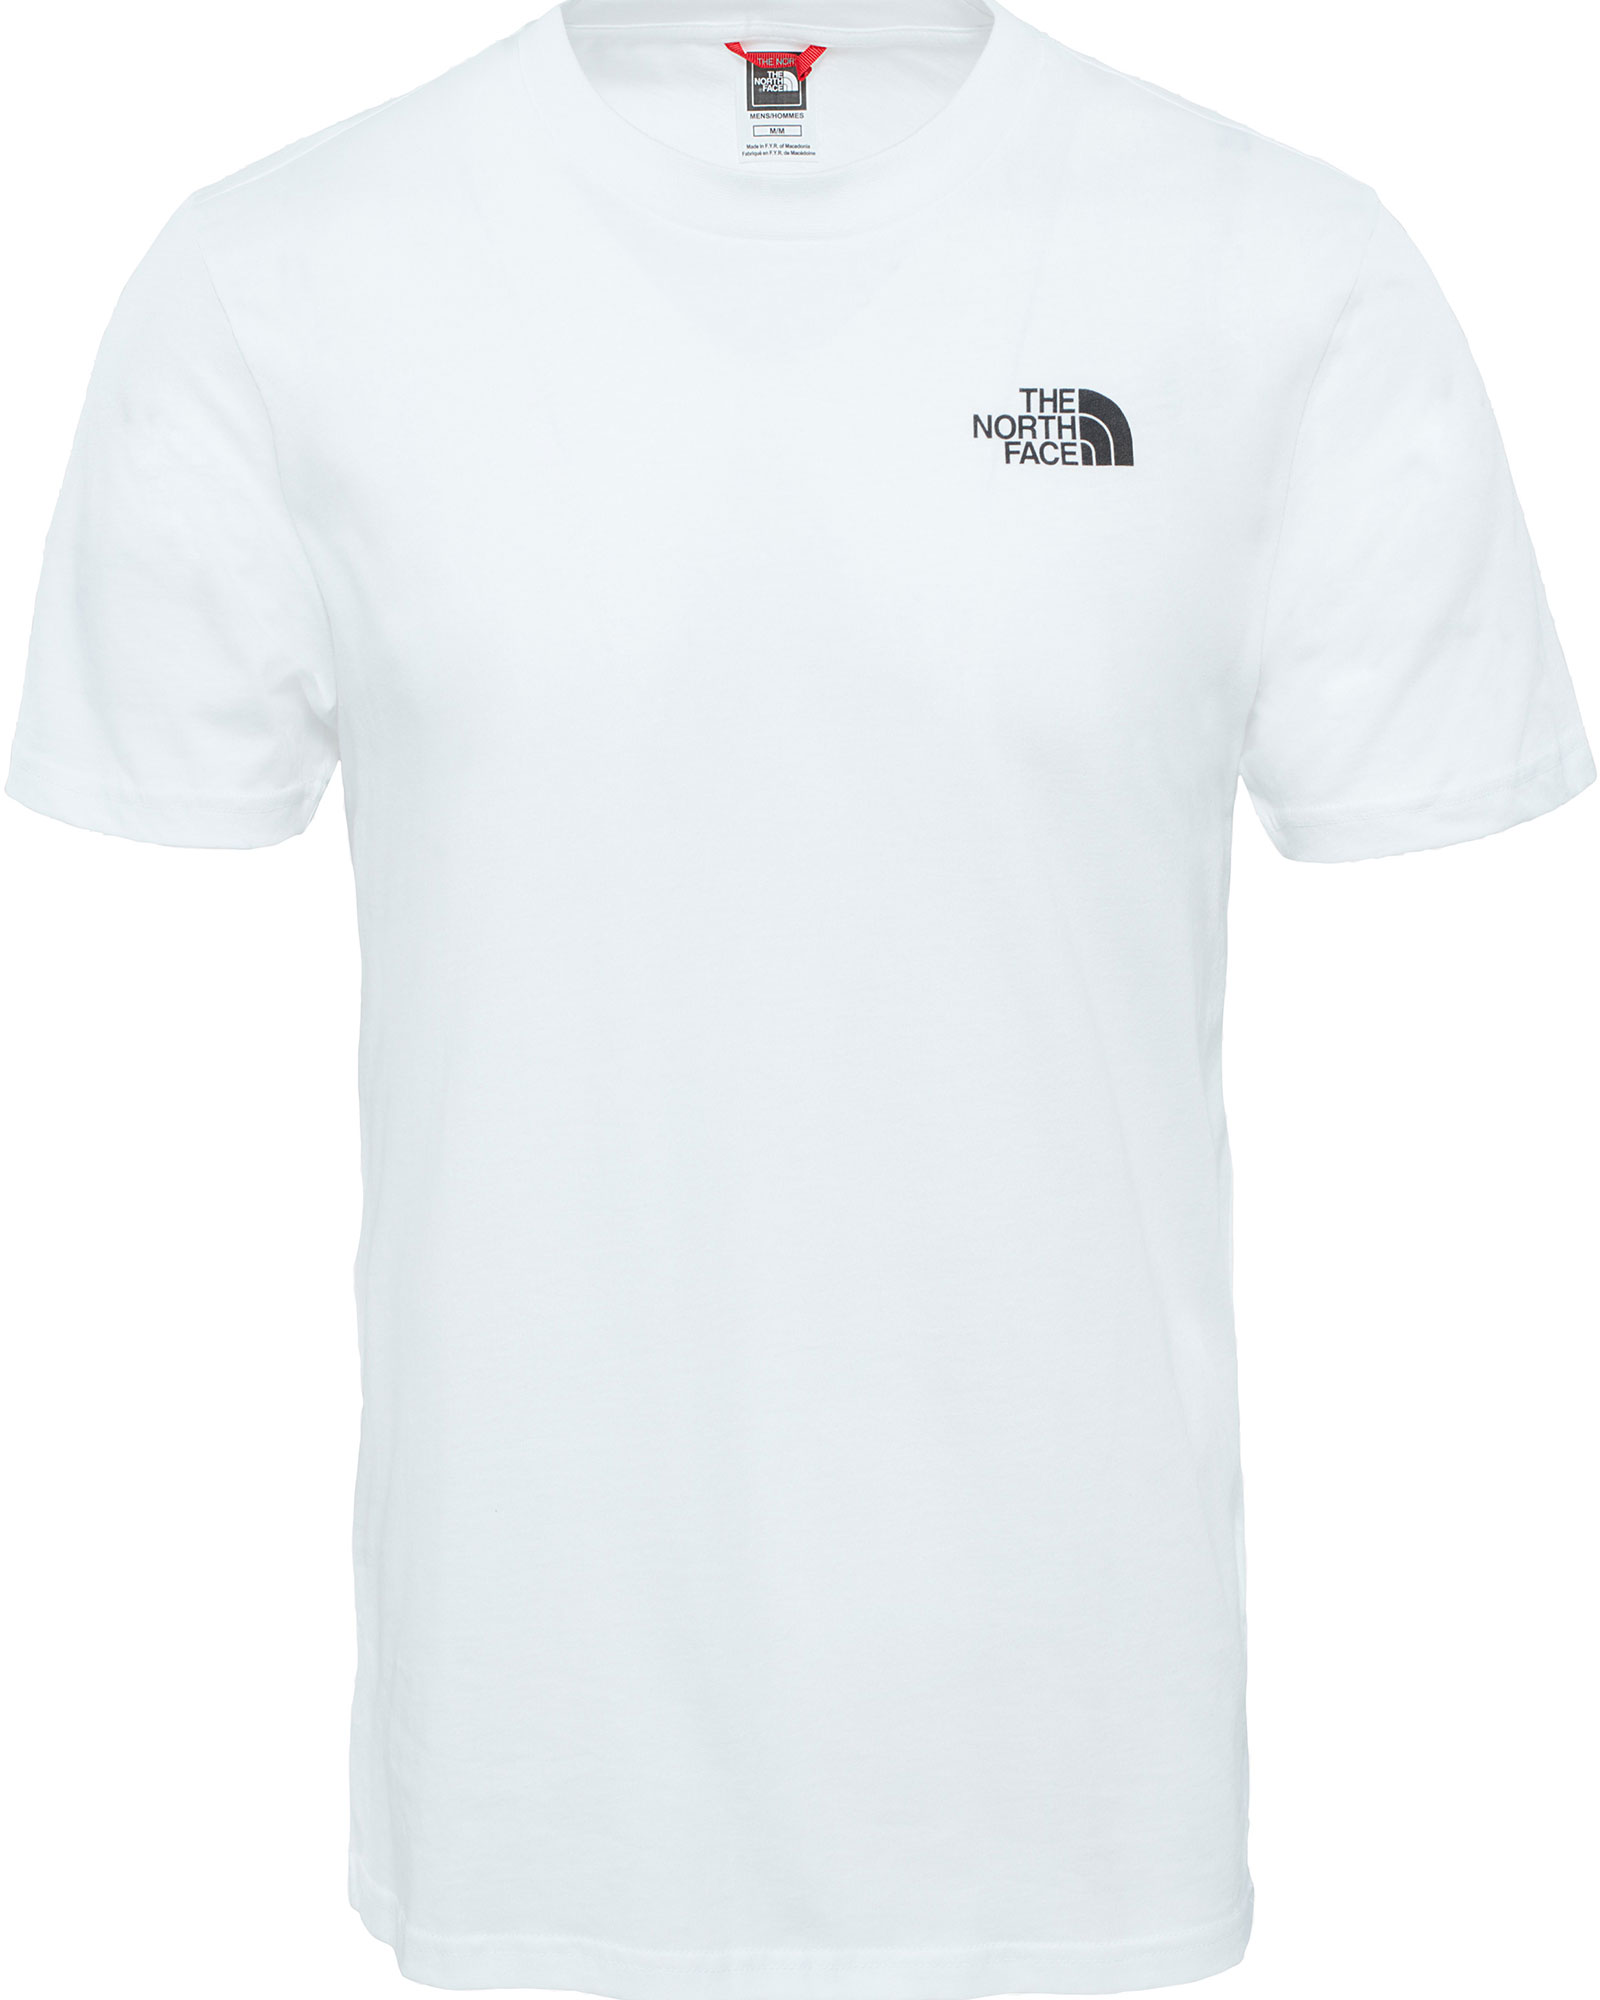 The North Face Simple Dome Men’s T Shirt - TNF White XL